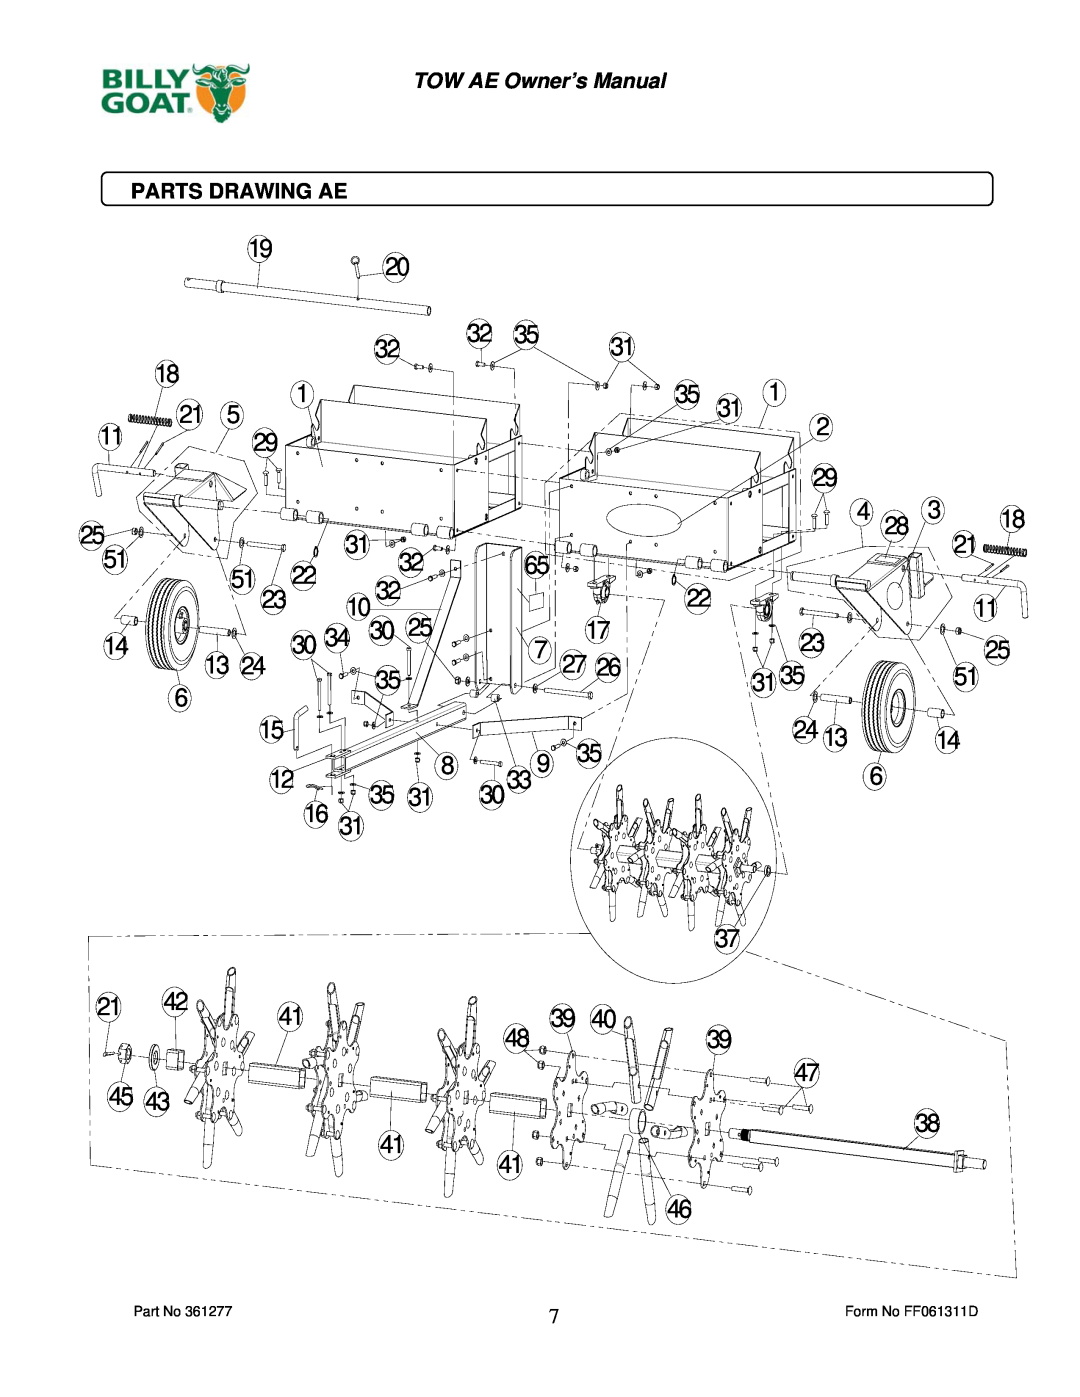 Billy Goat AET48 owner manual Parts Drawing Ae 